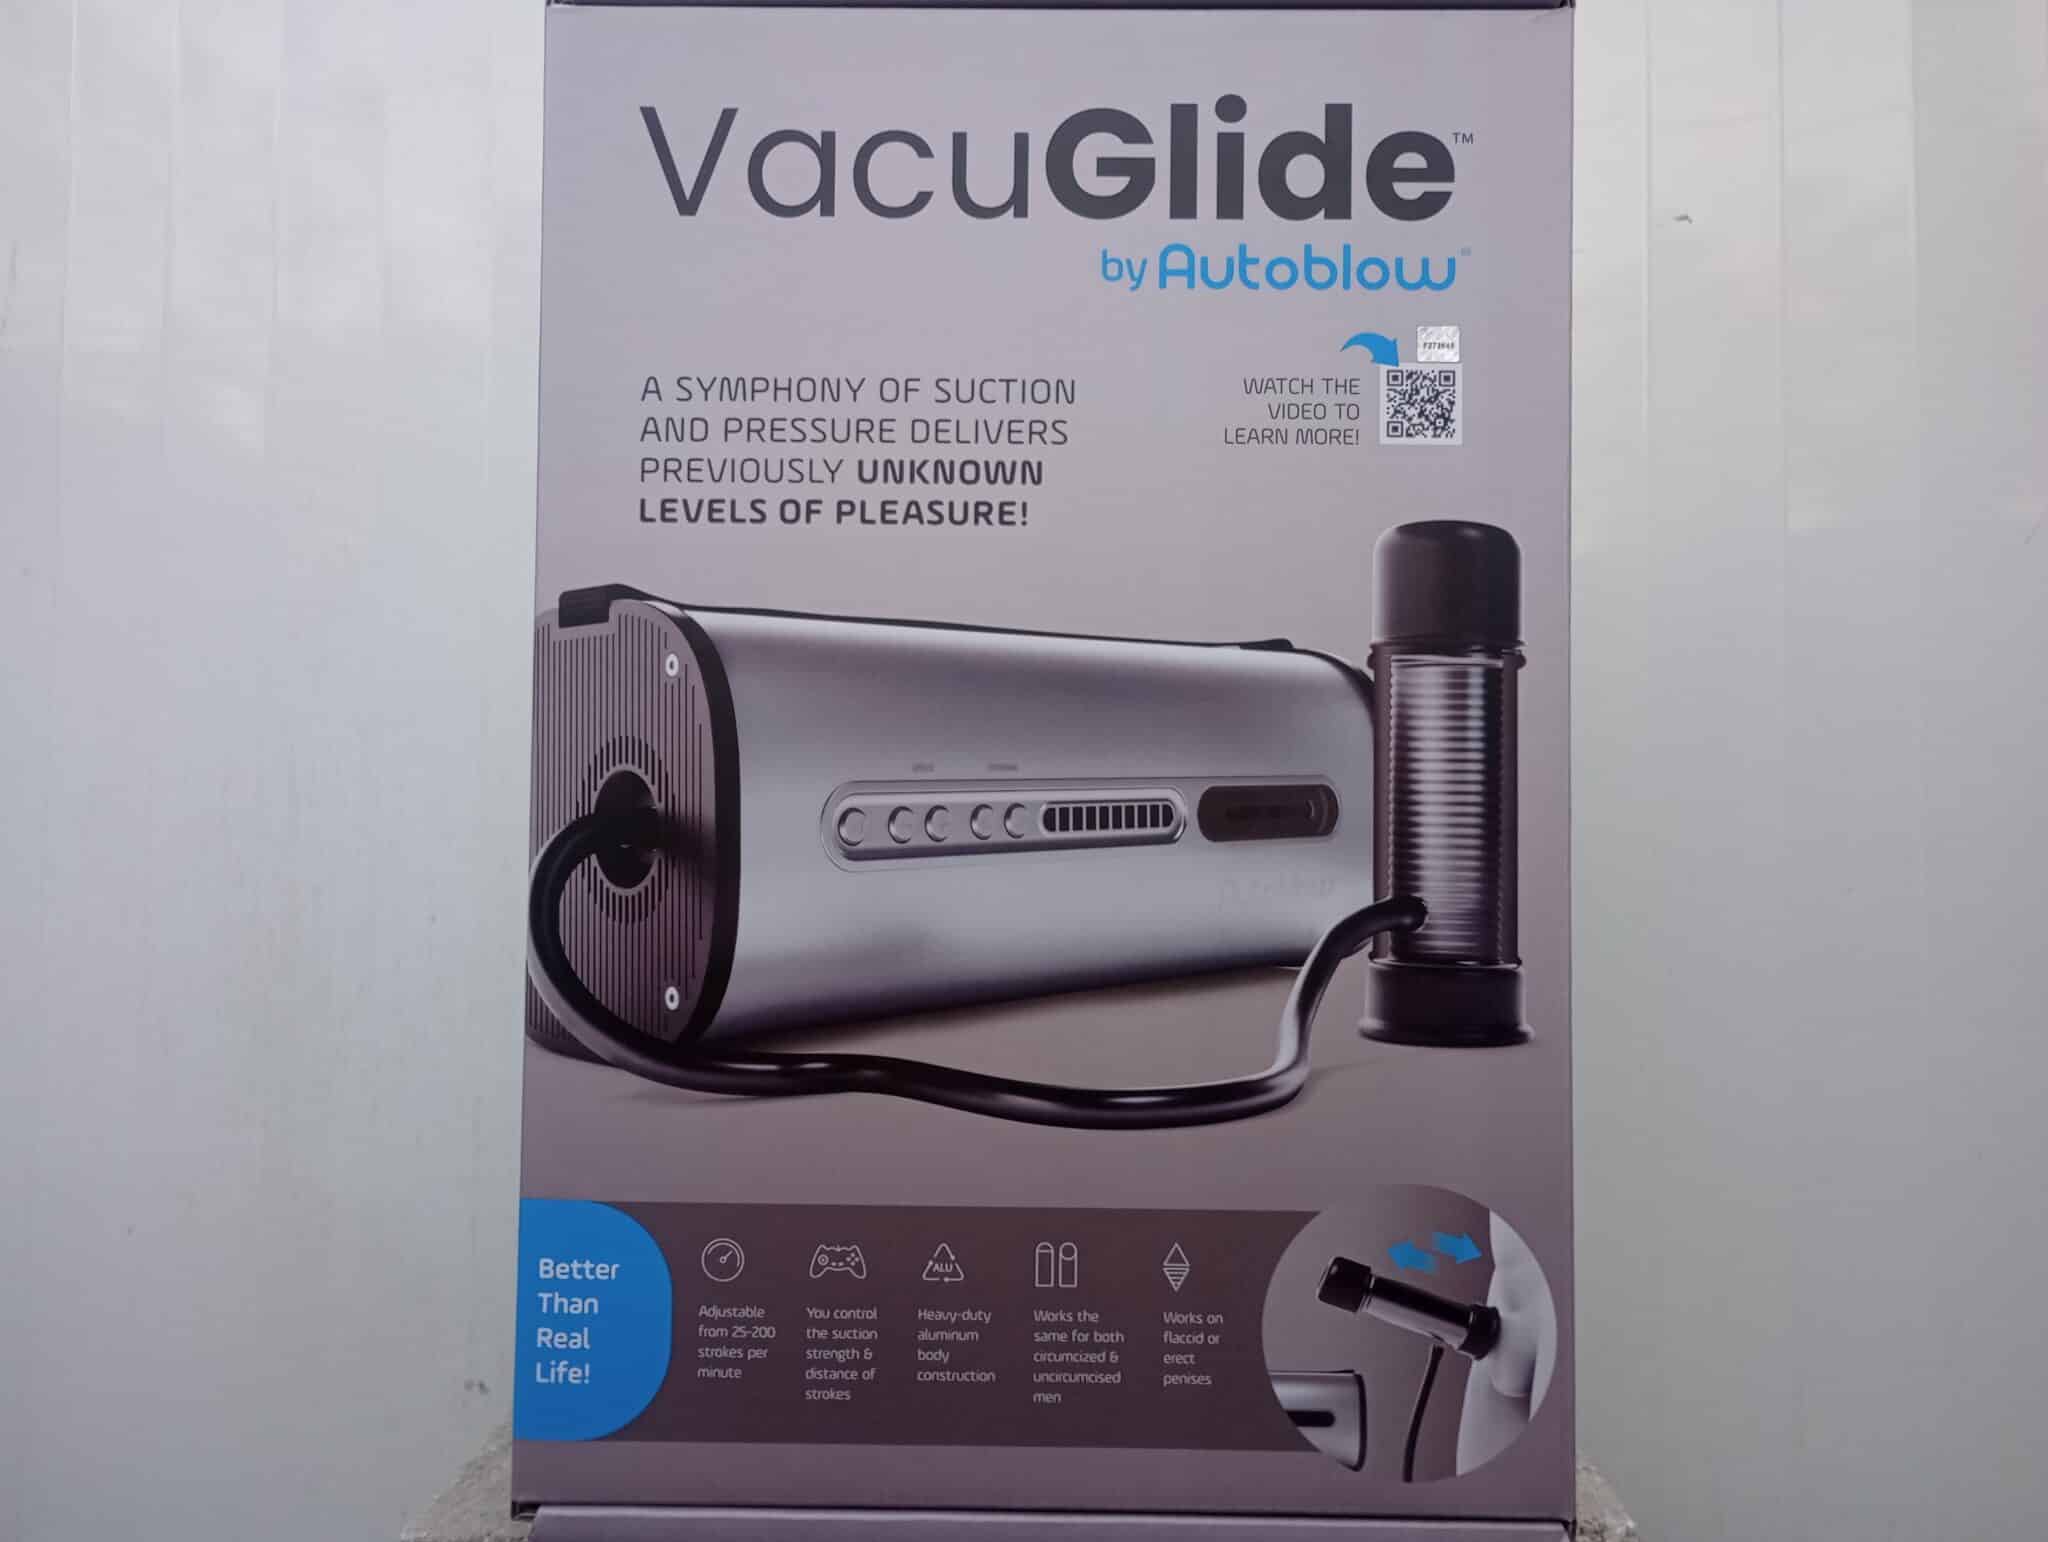 VacuGlide Packaging: A Testament to Quality?